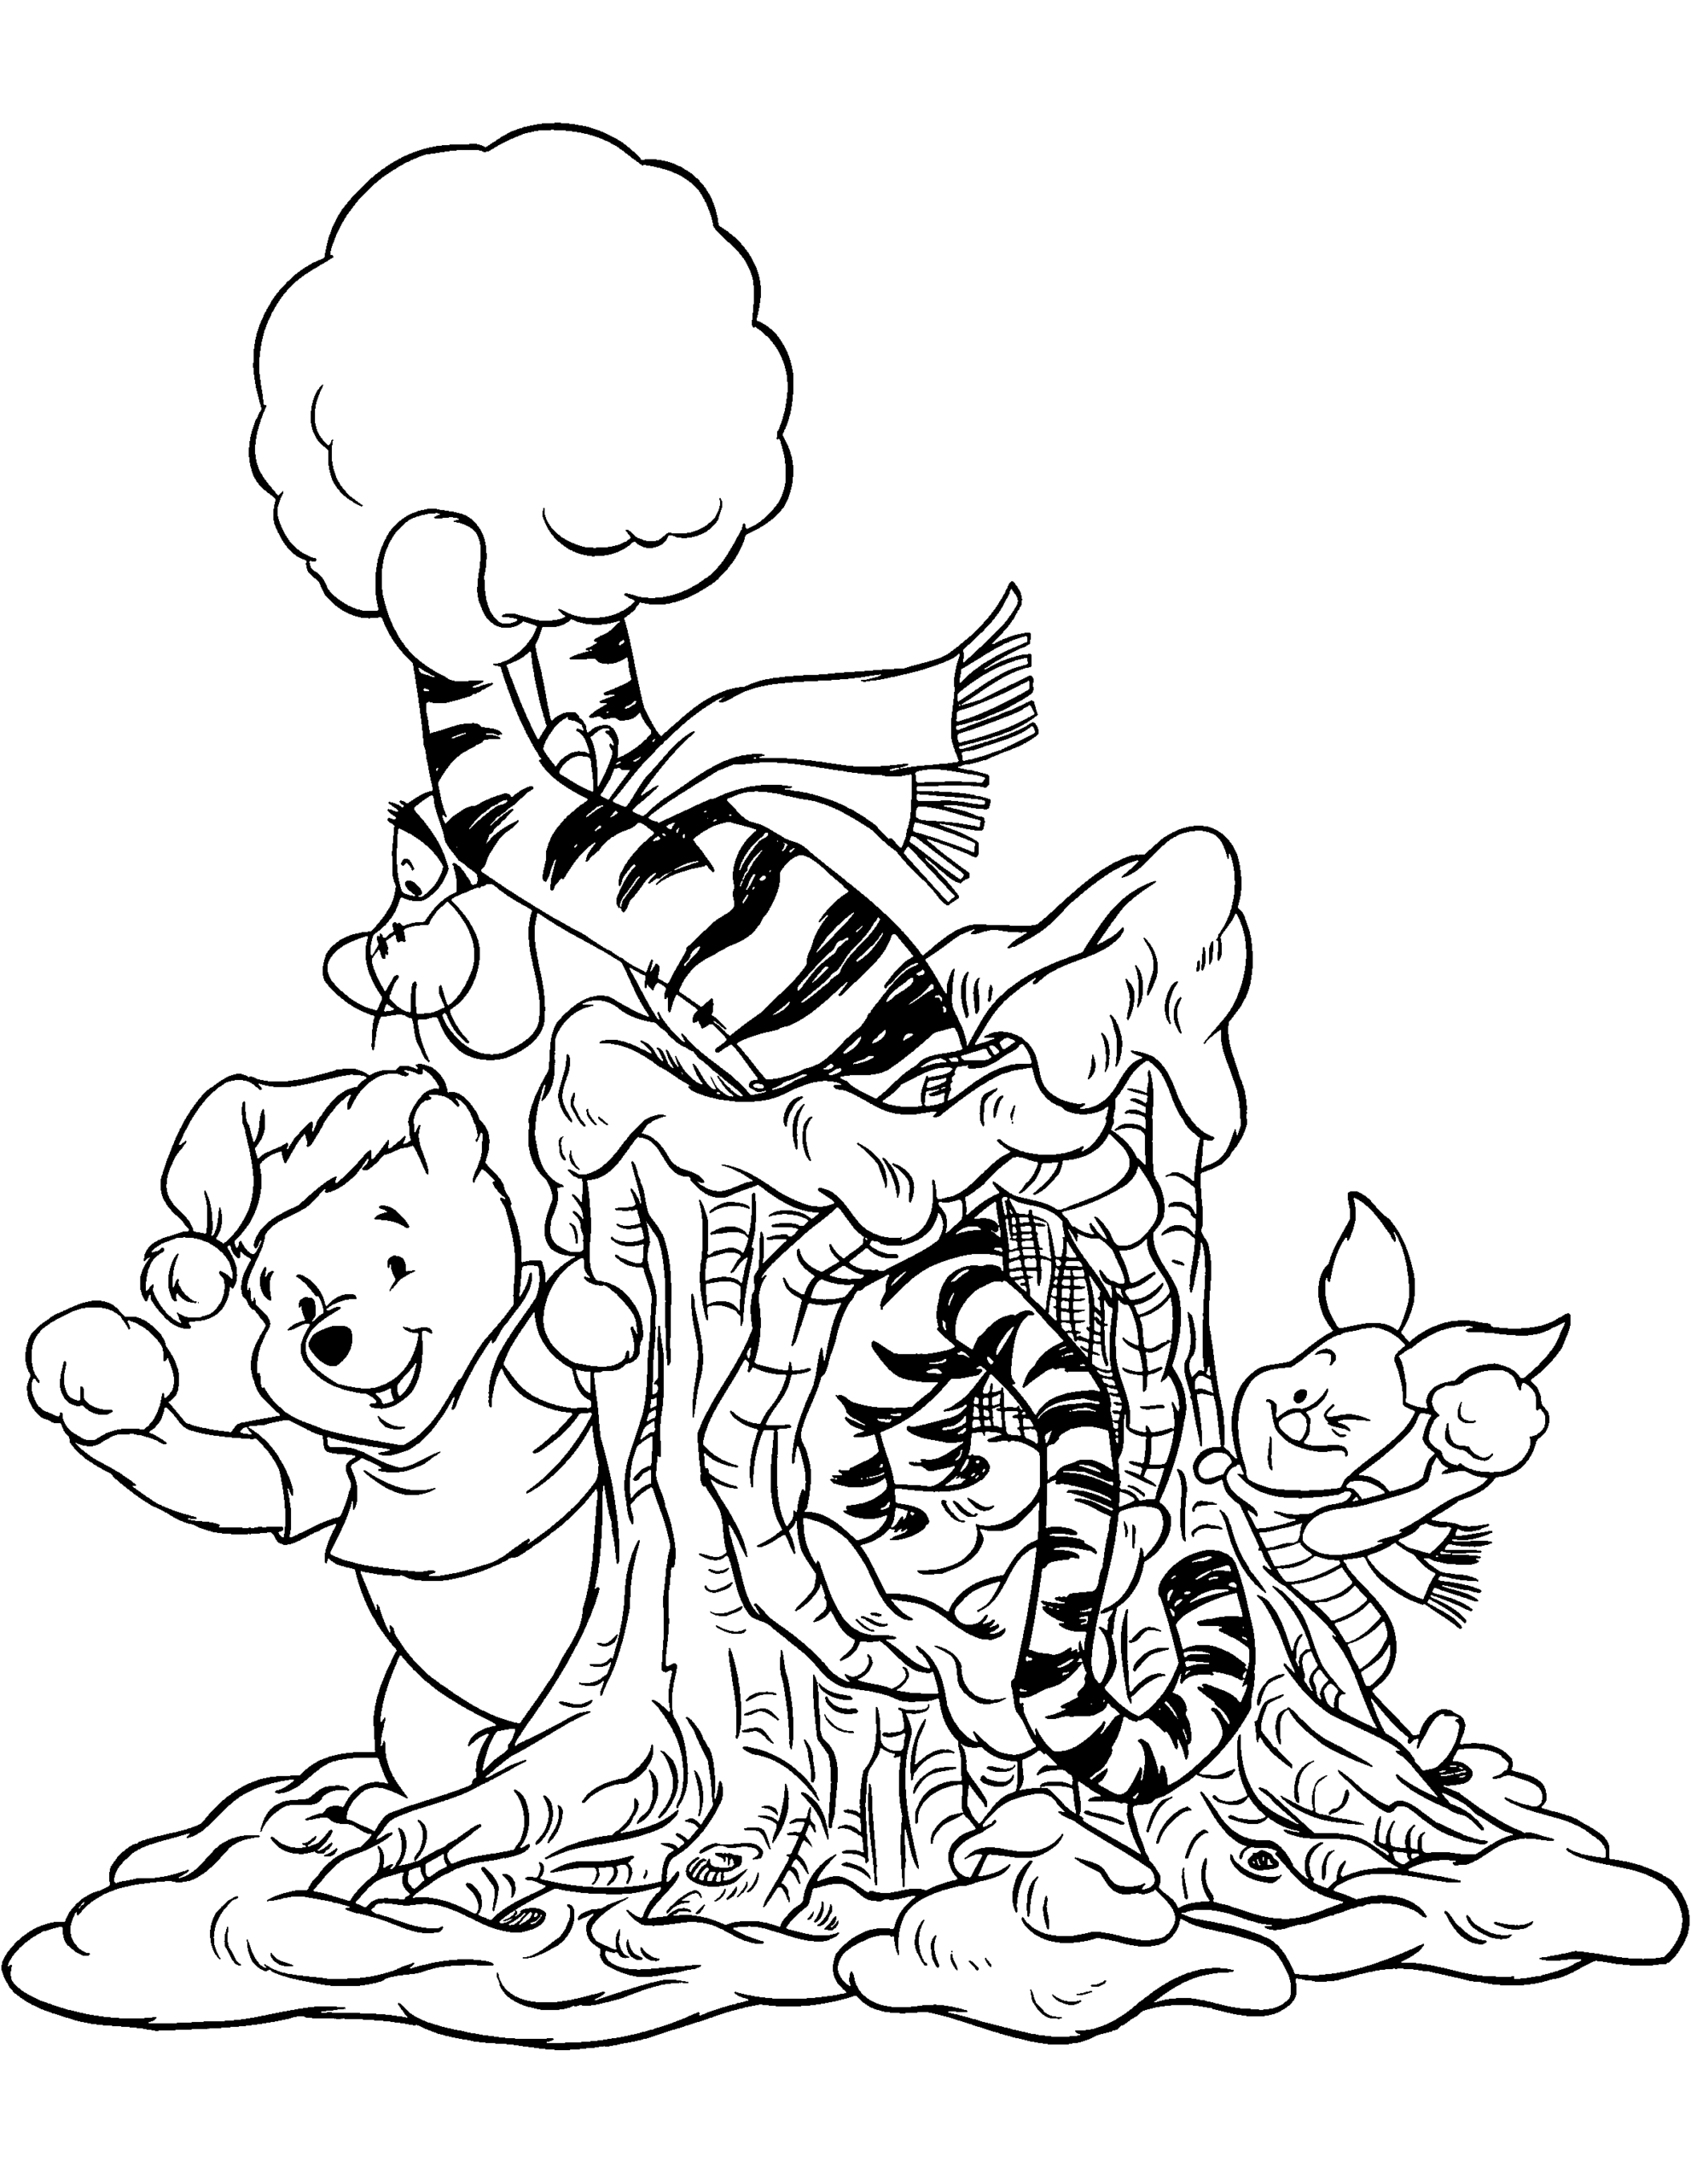 Winnie the Pooh Coloring Pages Cartoons winnie the pooh 34 Printable 2020 7138 Coloring4free